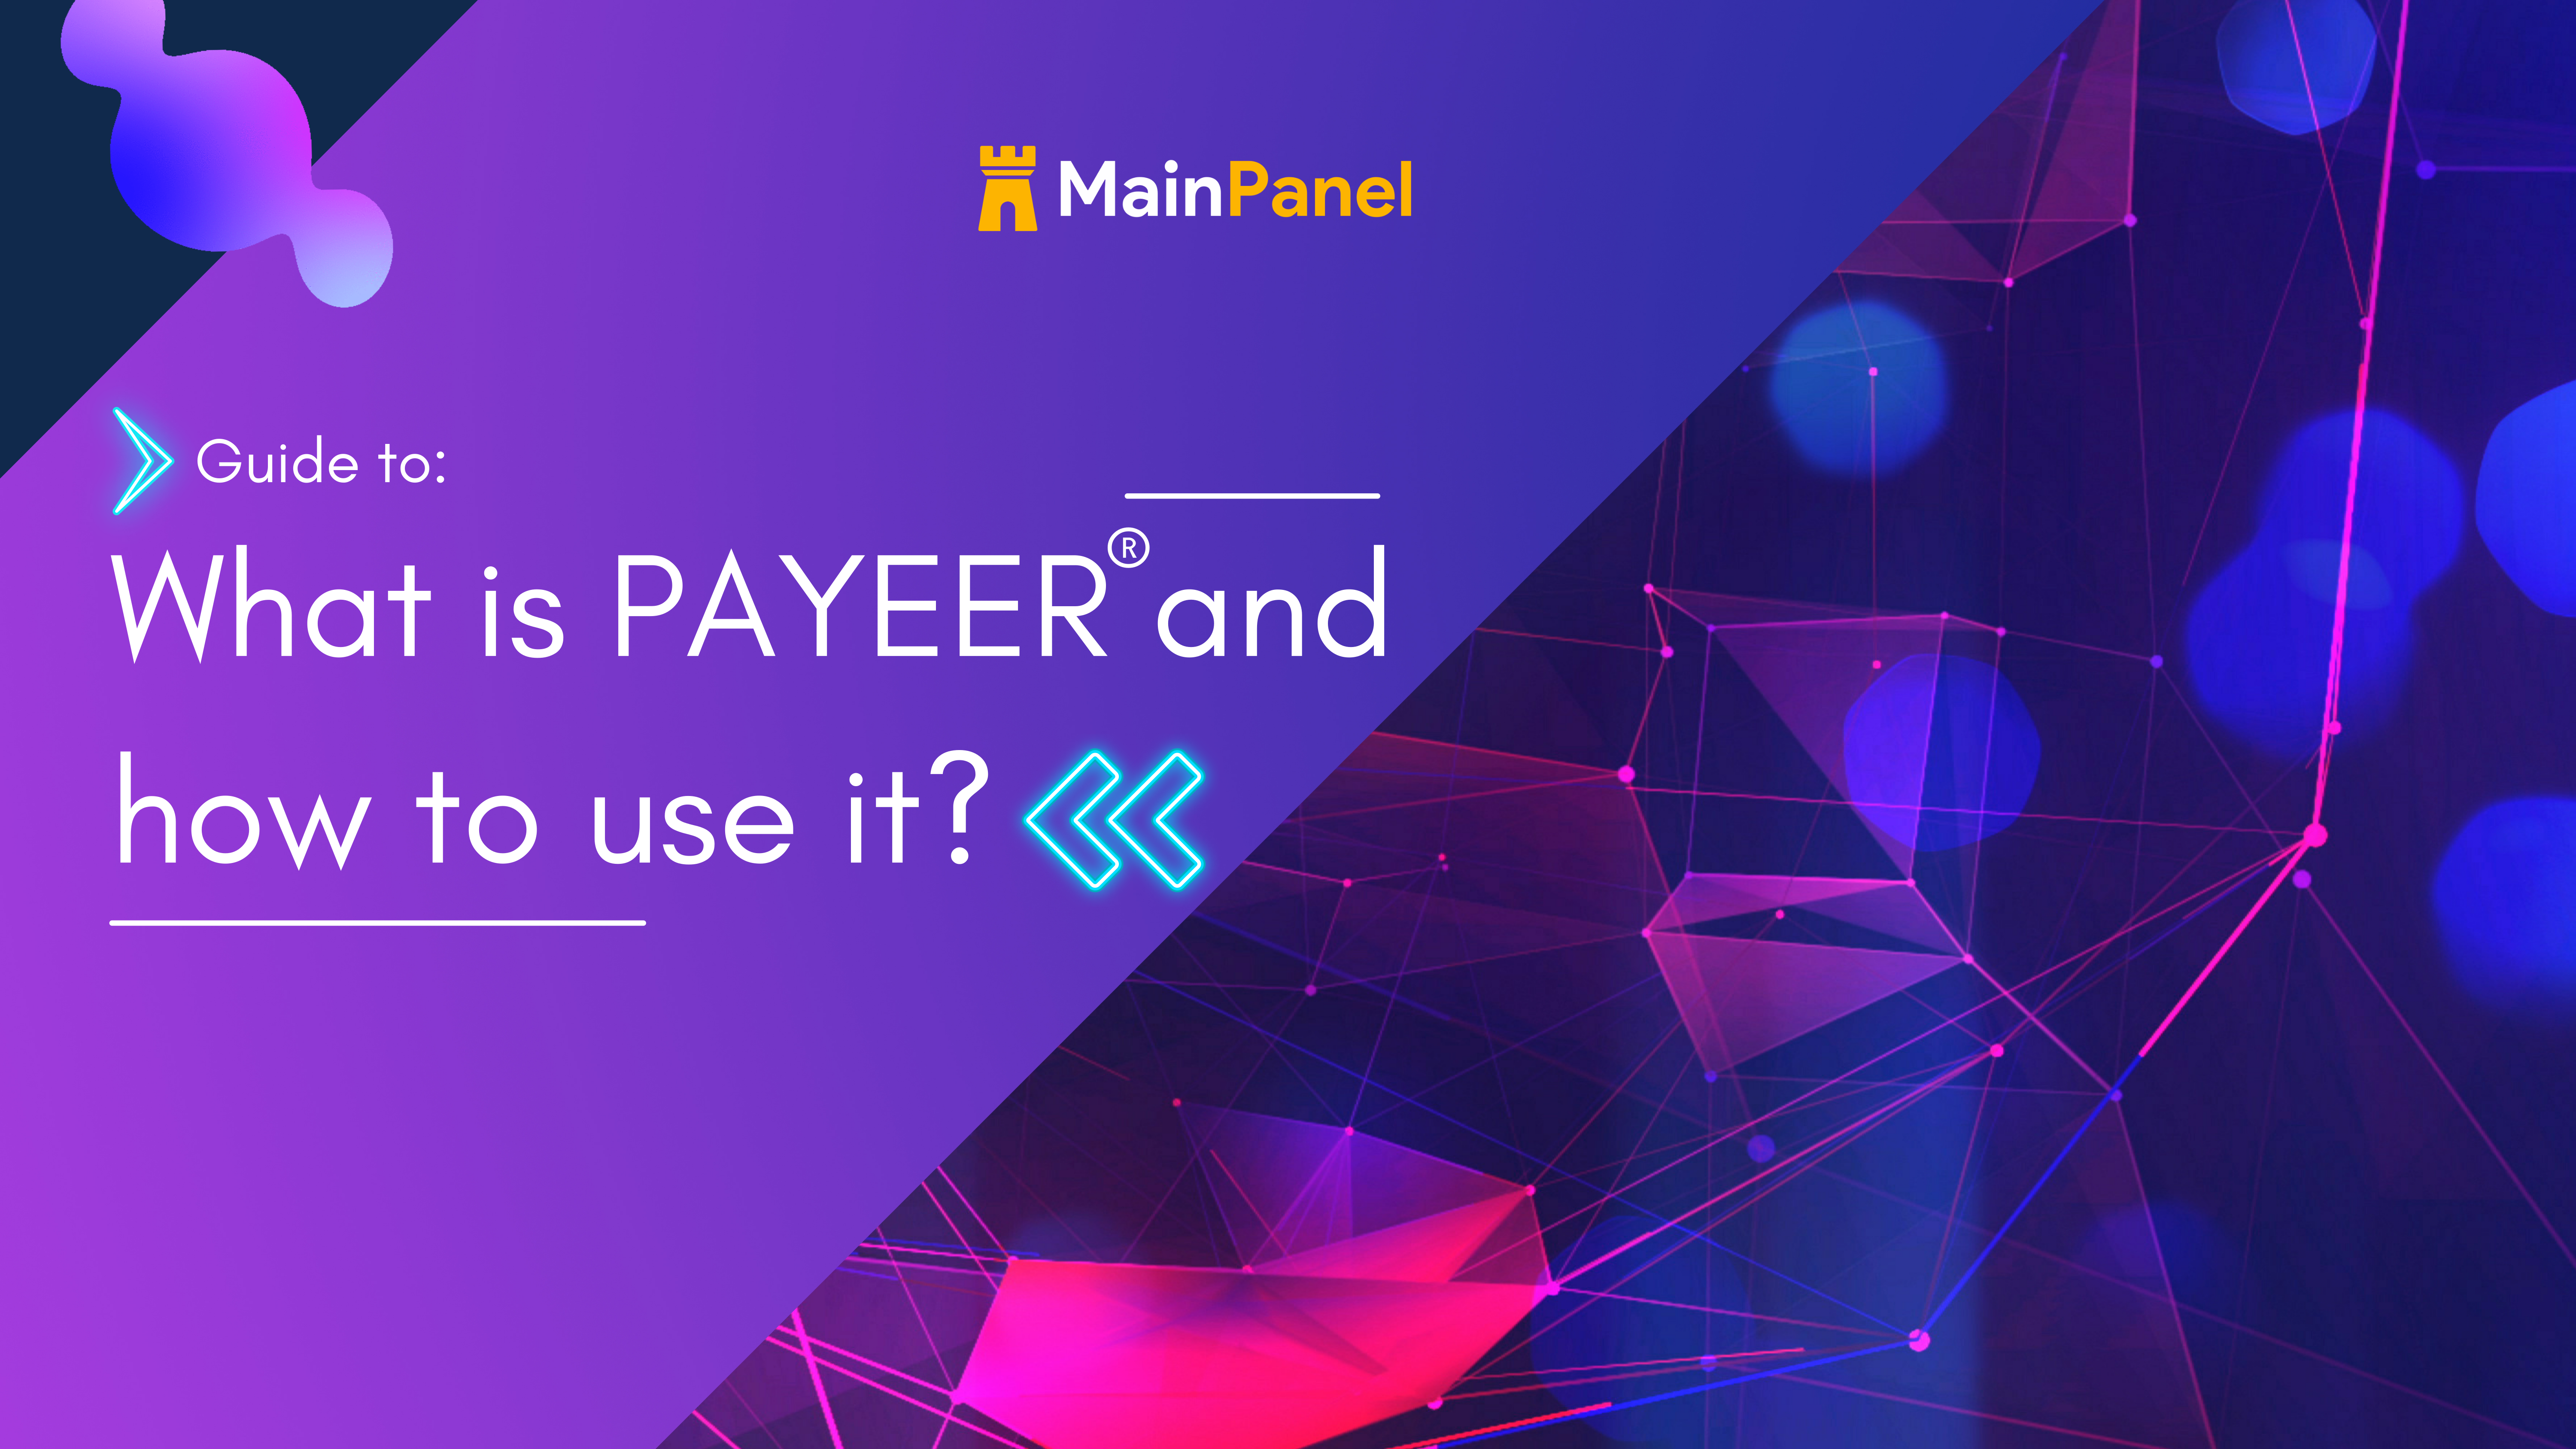 What is Payeer and how to use it